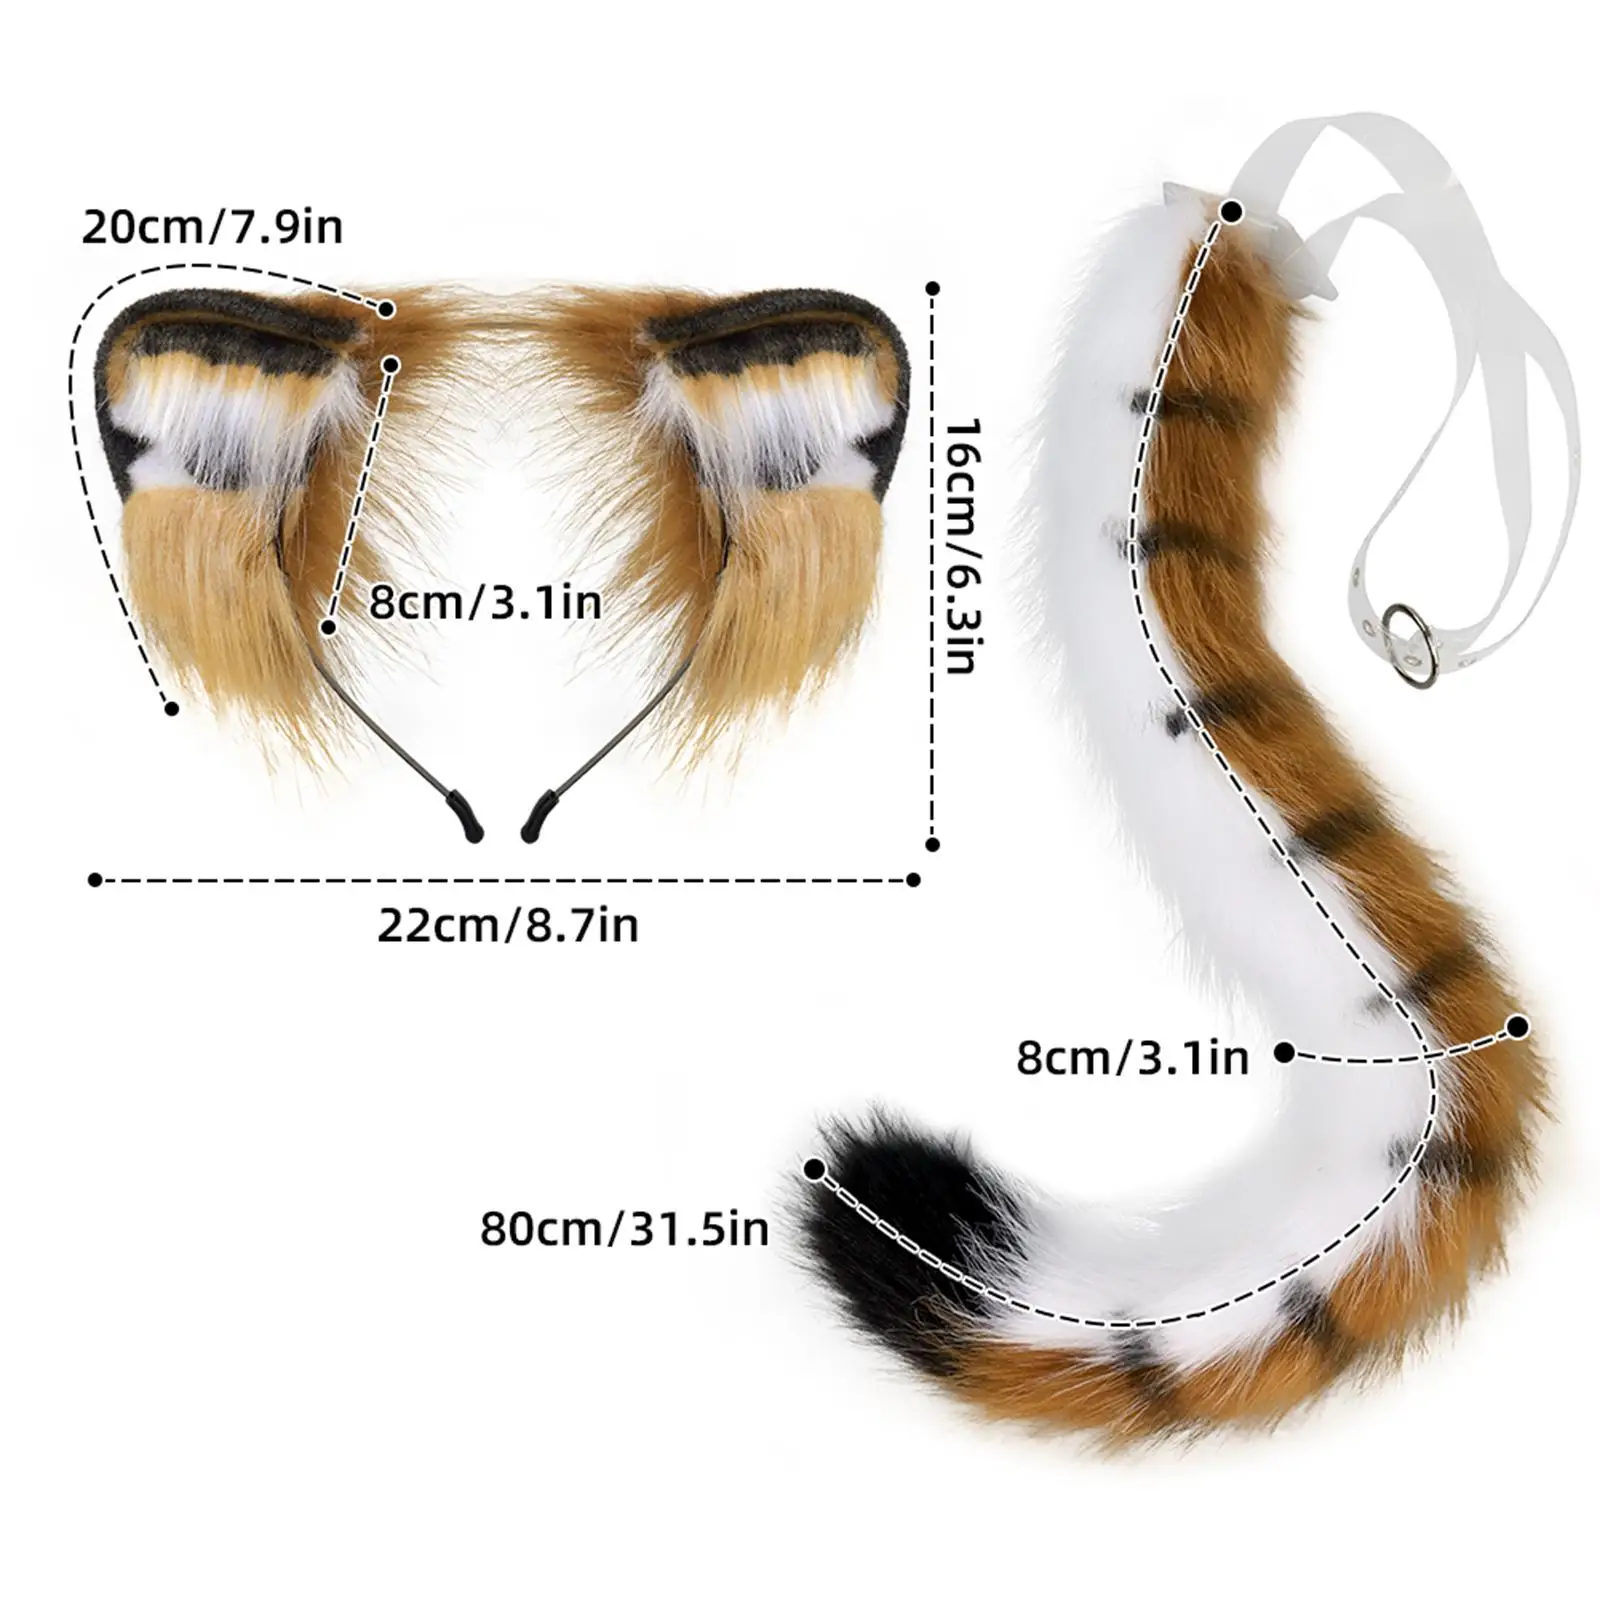 Tiger Ears and Tail Set Cosplay Adjustable Women Girls Headband Tiger Tail for Performance Party Masquerade Role Play Halloween